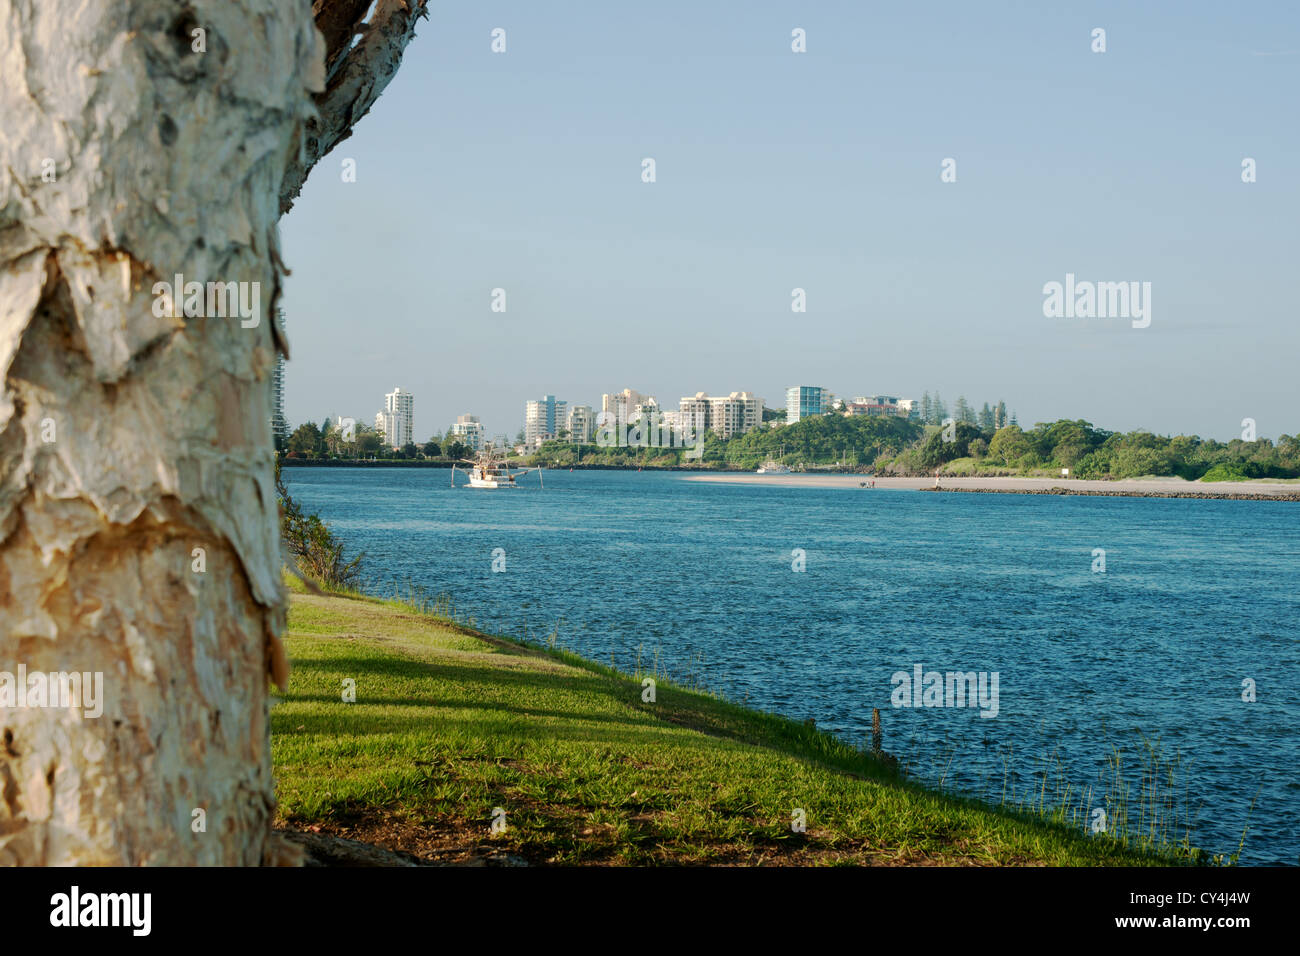 Tweed River flowing to coaster past the city of Tweed, Australia. Stock Photo